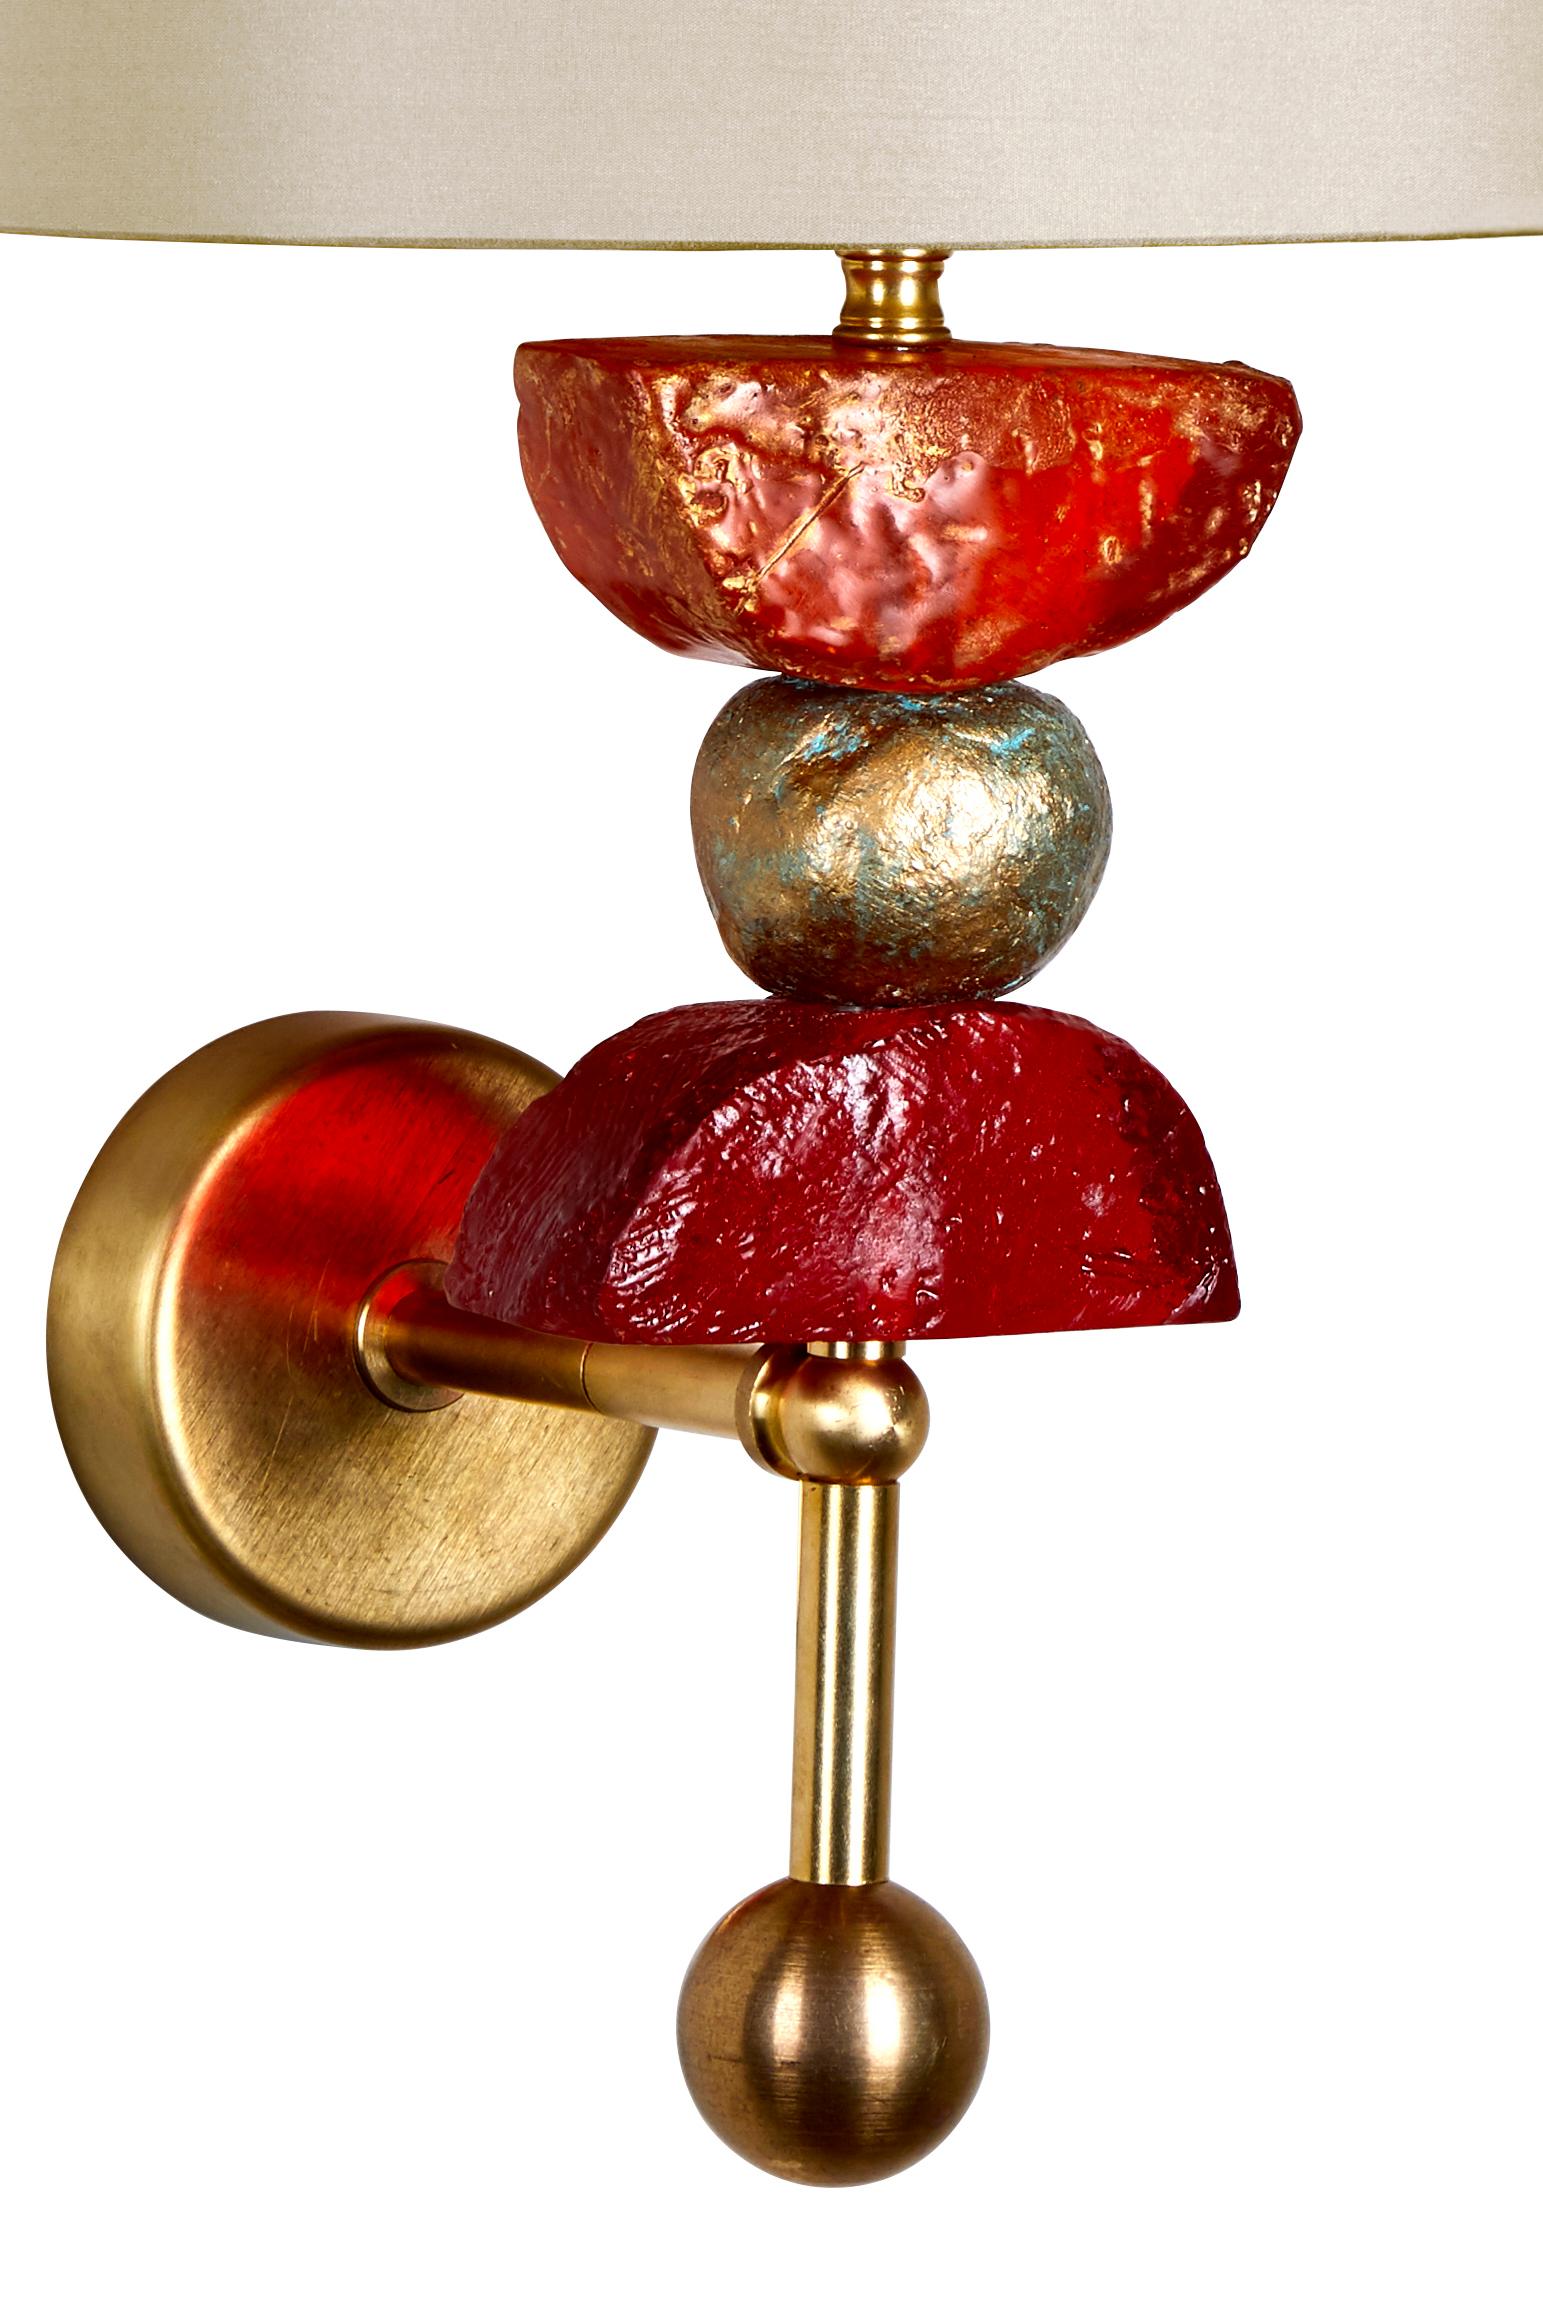 Modern Tokyo Wall Light, Brass and Resin in Amber Pigmentation by Margit Wittig